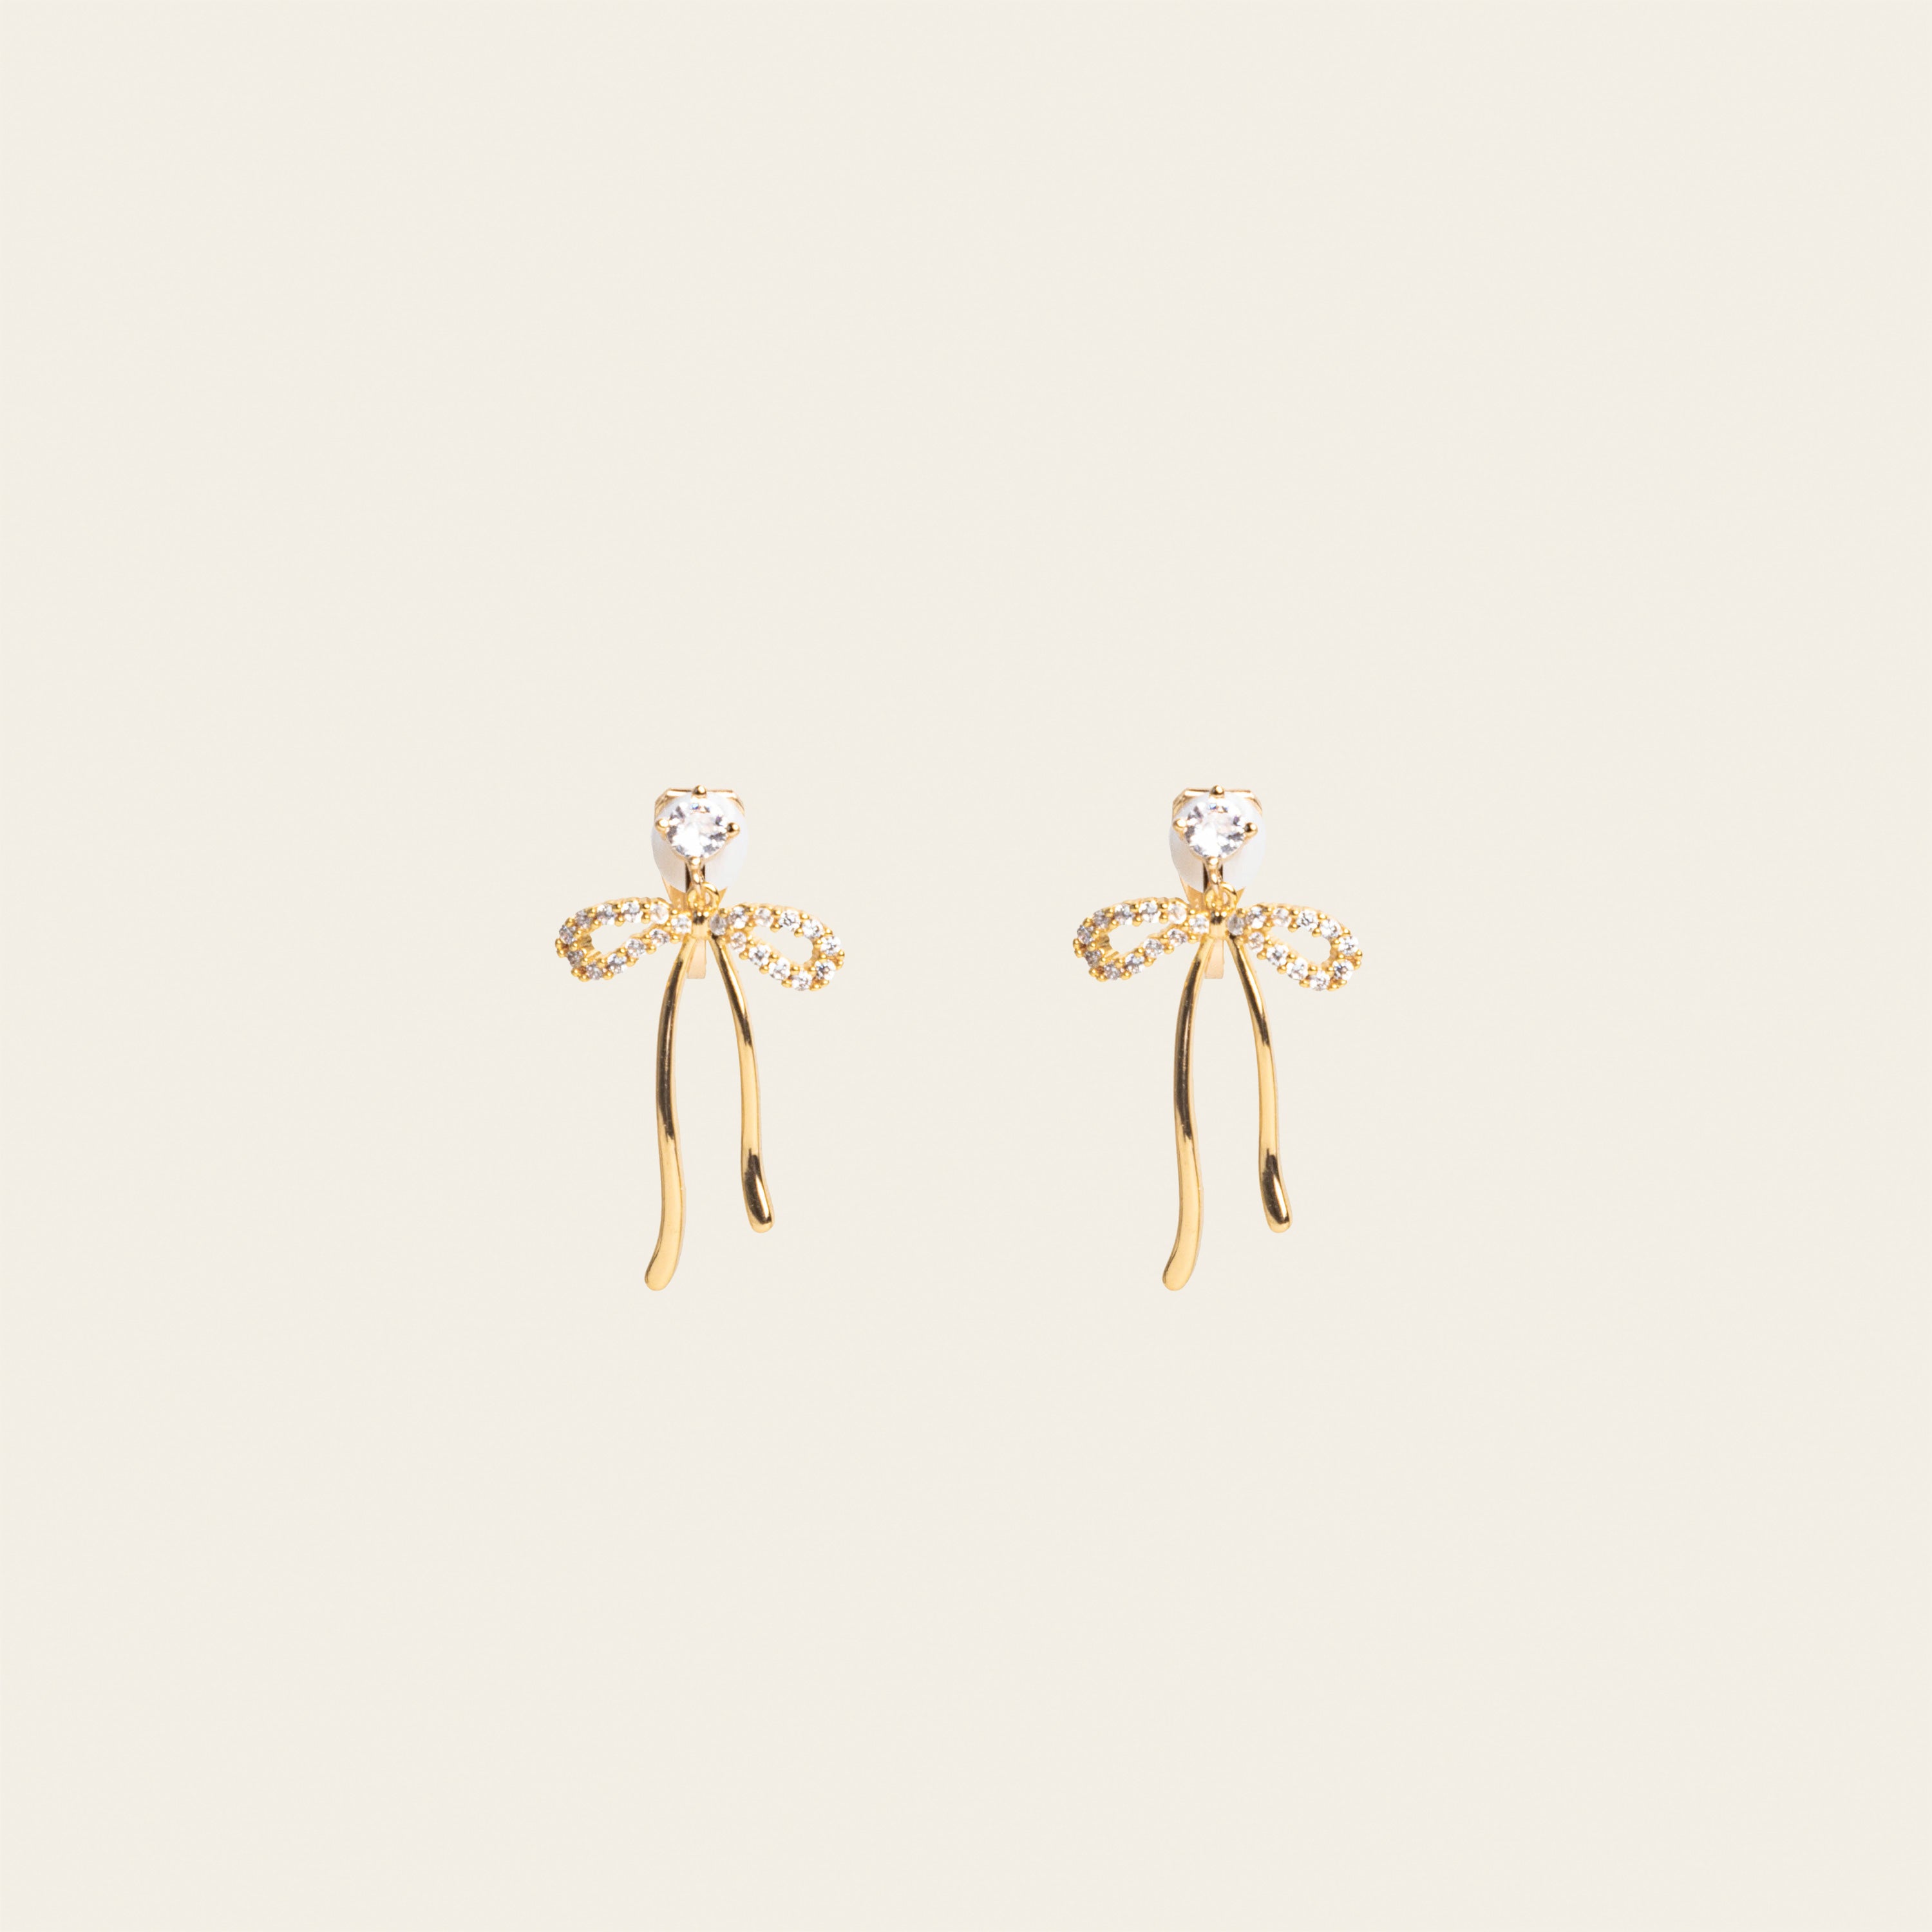 Image of the Anna Clip On Earrings, offer an adjustable fit and 24-hour hold for unrivaled comfort. Elevate your style effortlessly with the touch of elegance these earrings provide.